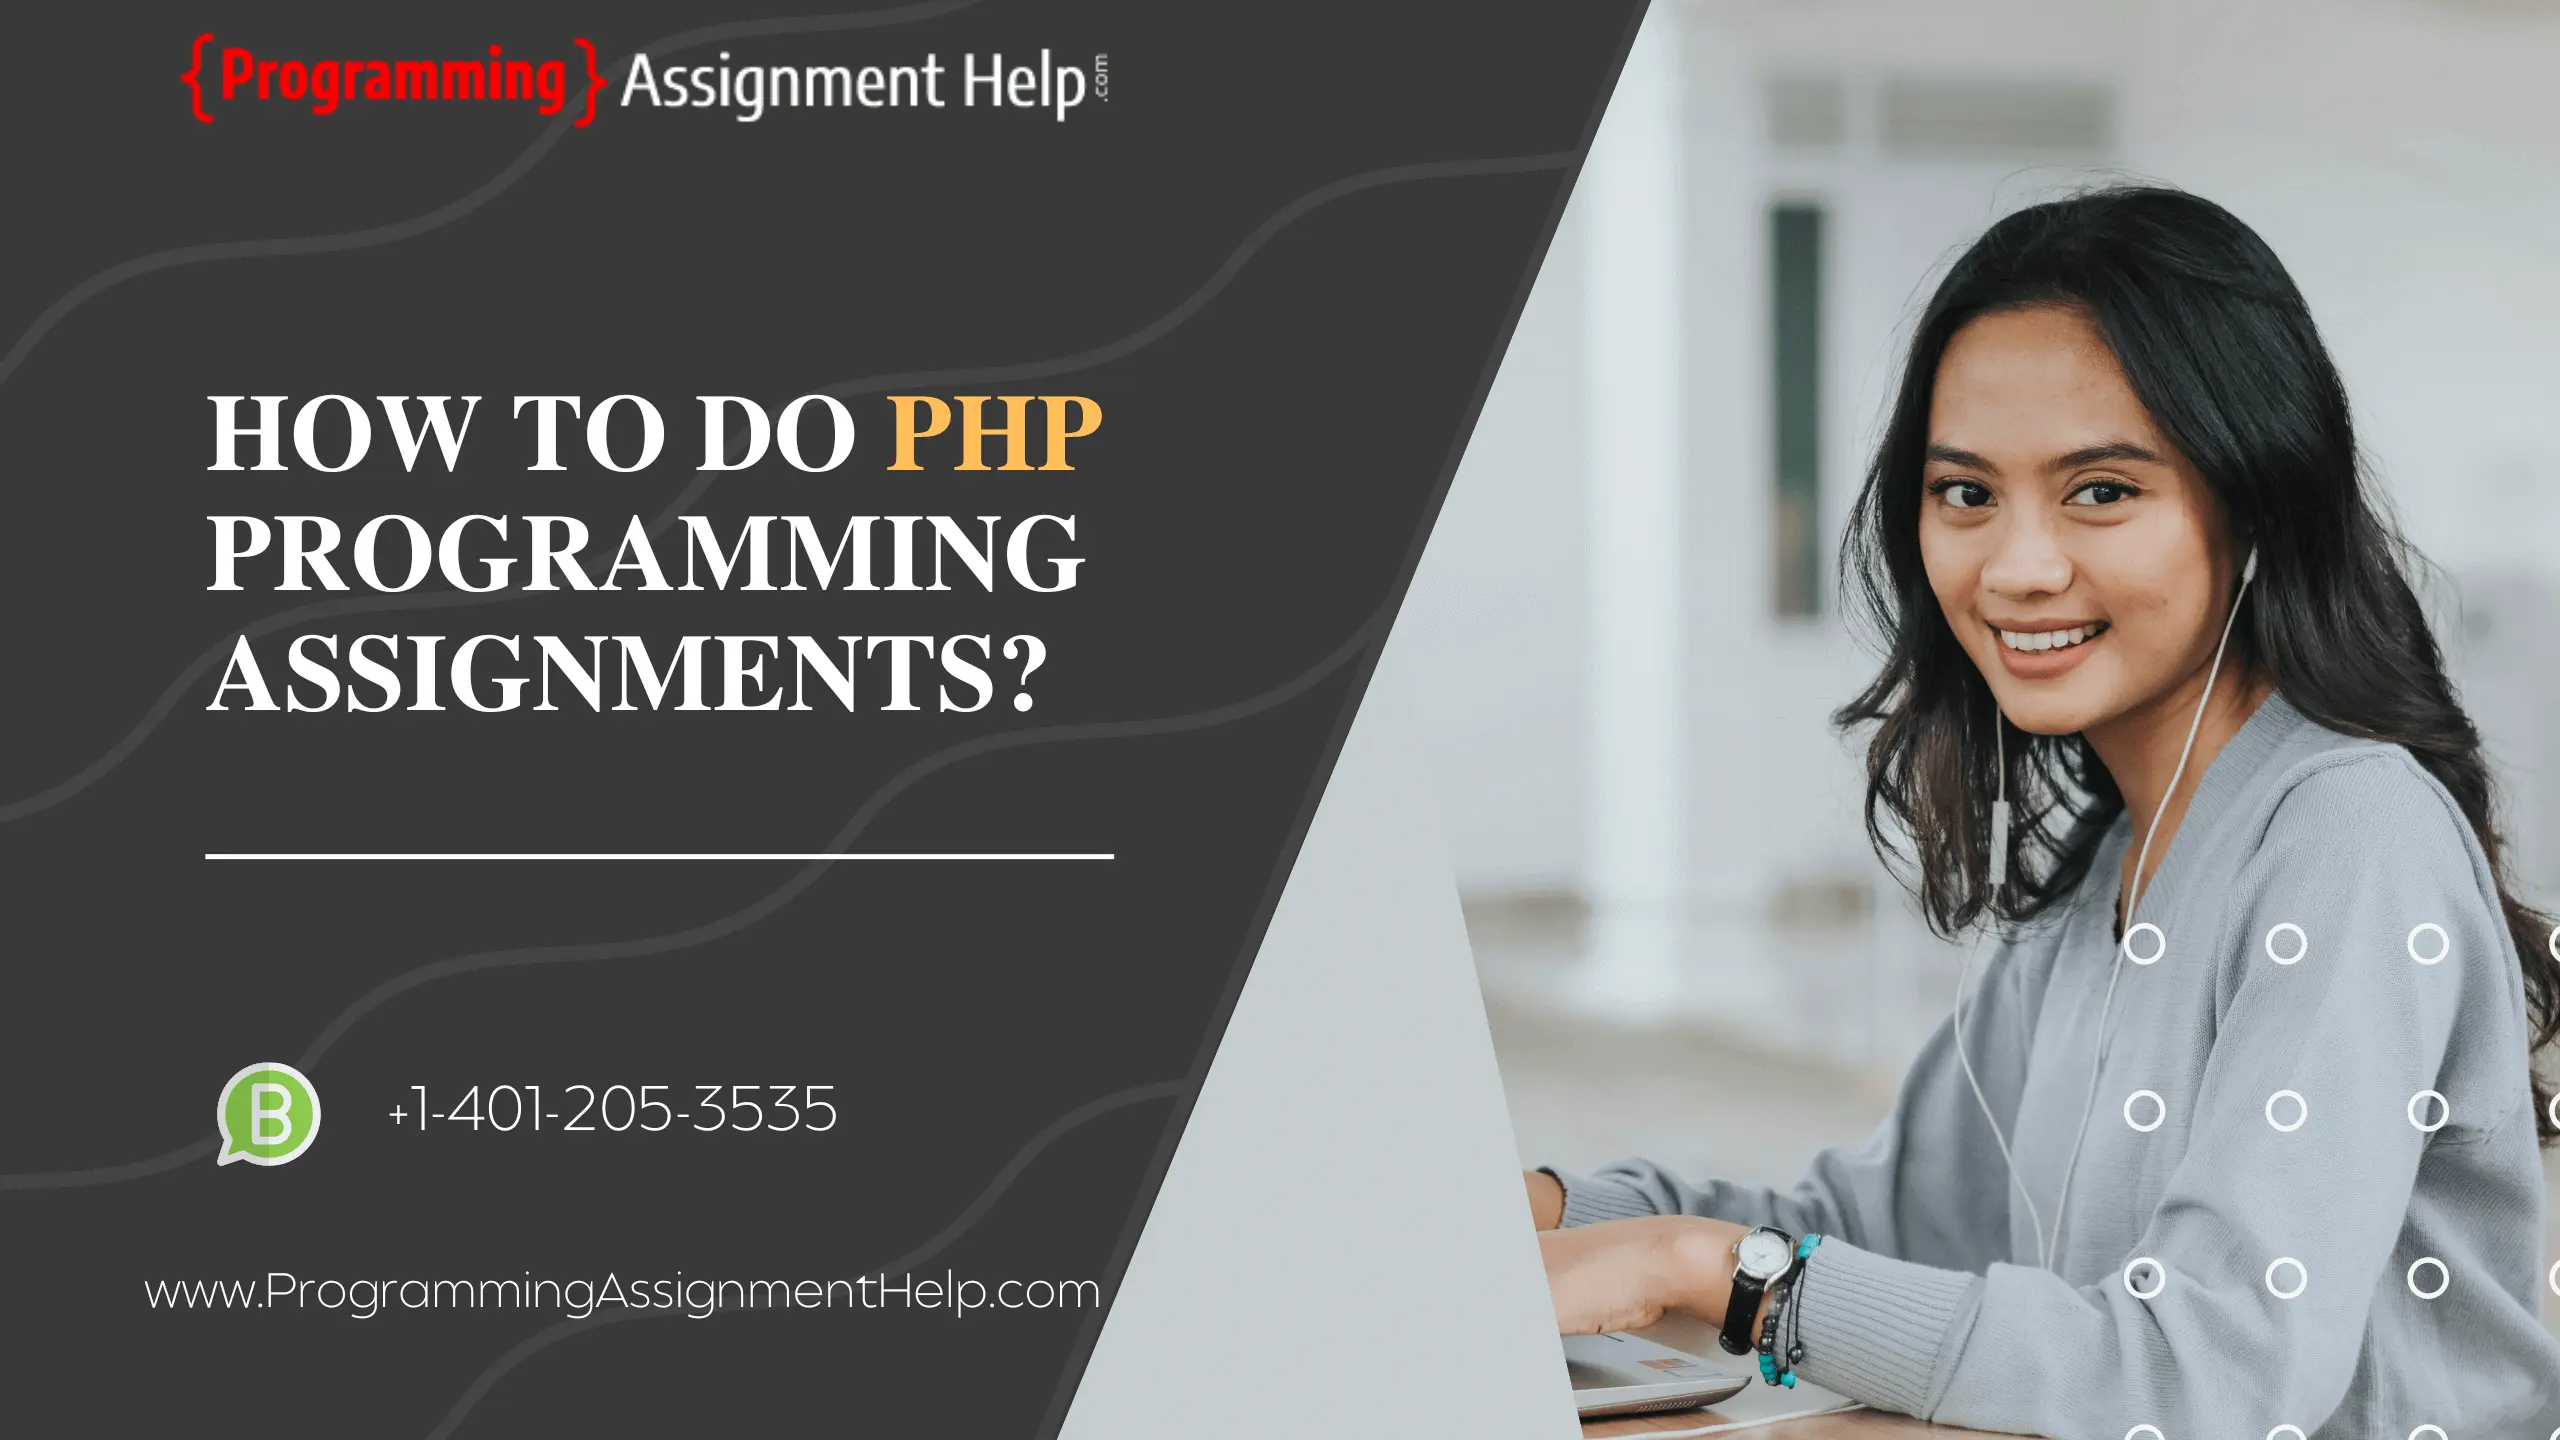 How to do PHP programming assignments